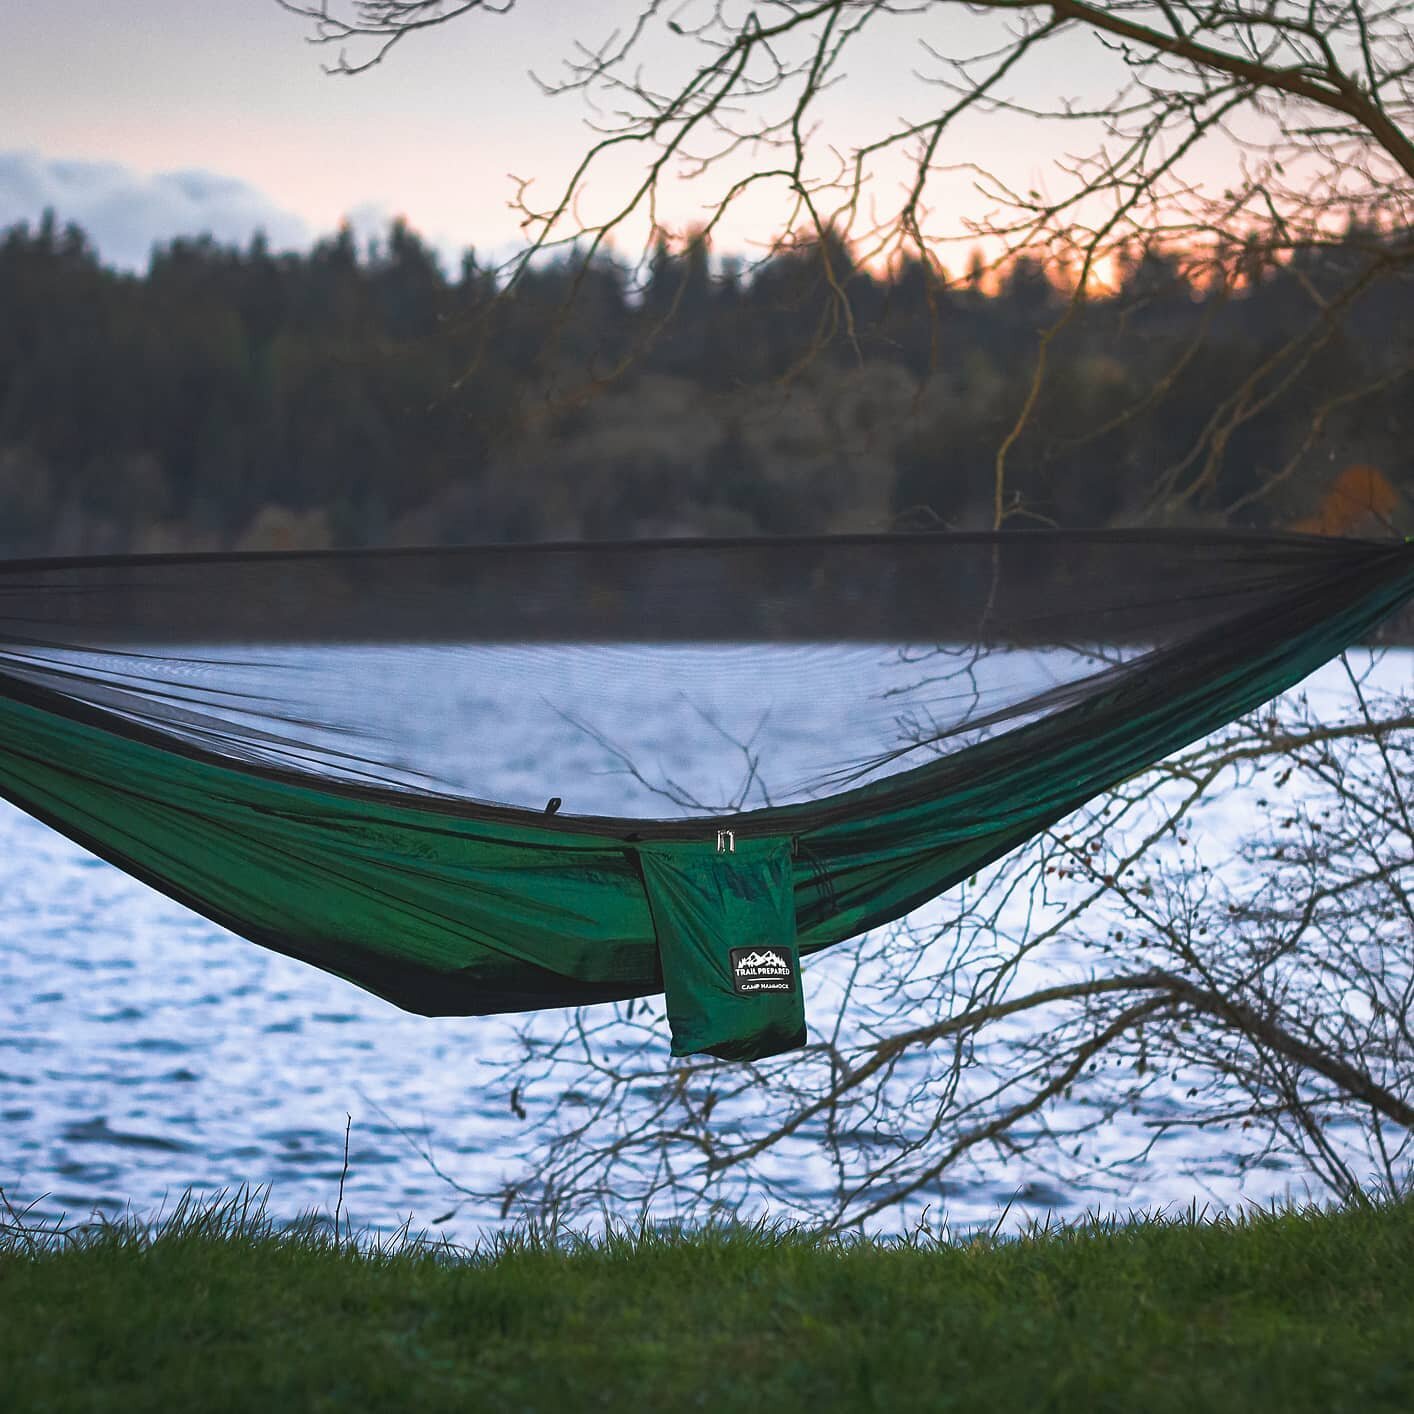 Check out our new Camp Hammock with built-in mosquito net!🏕️ Includes everything you need to get that sublime hang.🤙
-
-
-
-
-
#TrailPrepared #YouBelongOutdoors #CampHammock #Hammock #ParachuteHammock #MosquitoNet #BugNet #Camp #Camping #Hiking #Ba